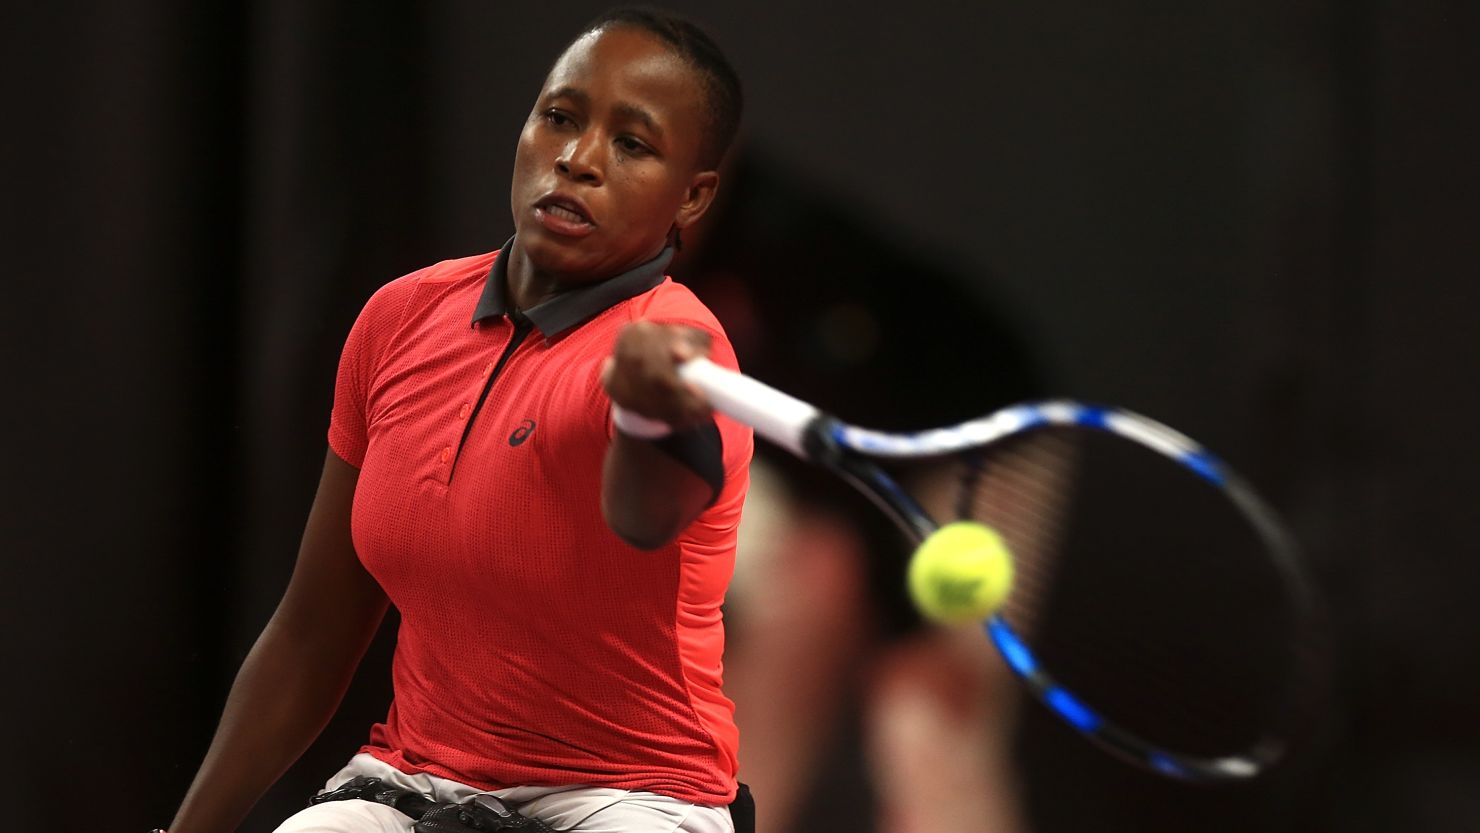 Kgothatso Montjane during her match against Diede De Groot of the Netherlands at the NEC Wheelchair Tennis Masters at Loughborough University, England on December 1, 2017. Photo by Ben Hoskins/Getty Images for the Tennis Foundation.